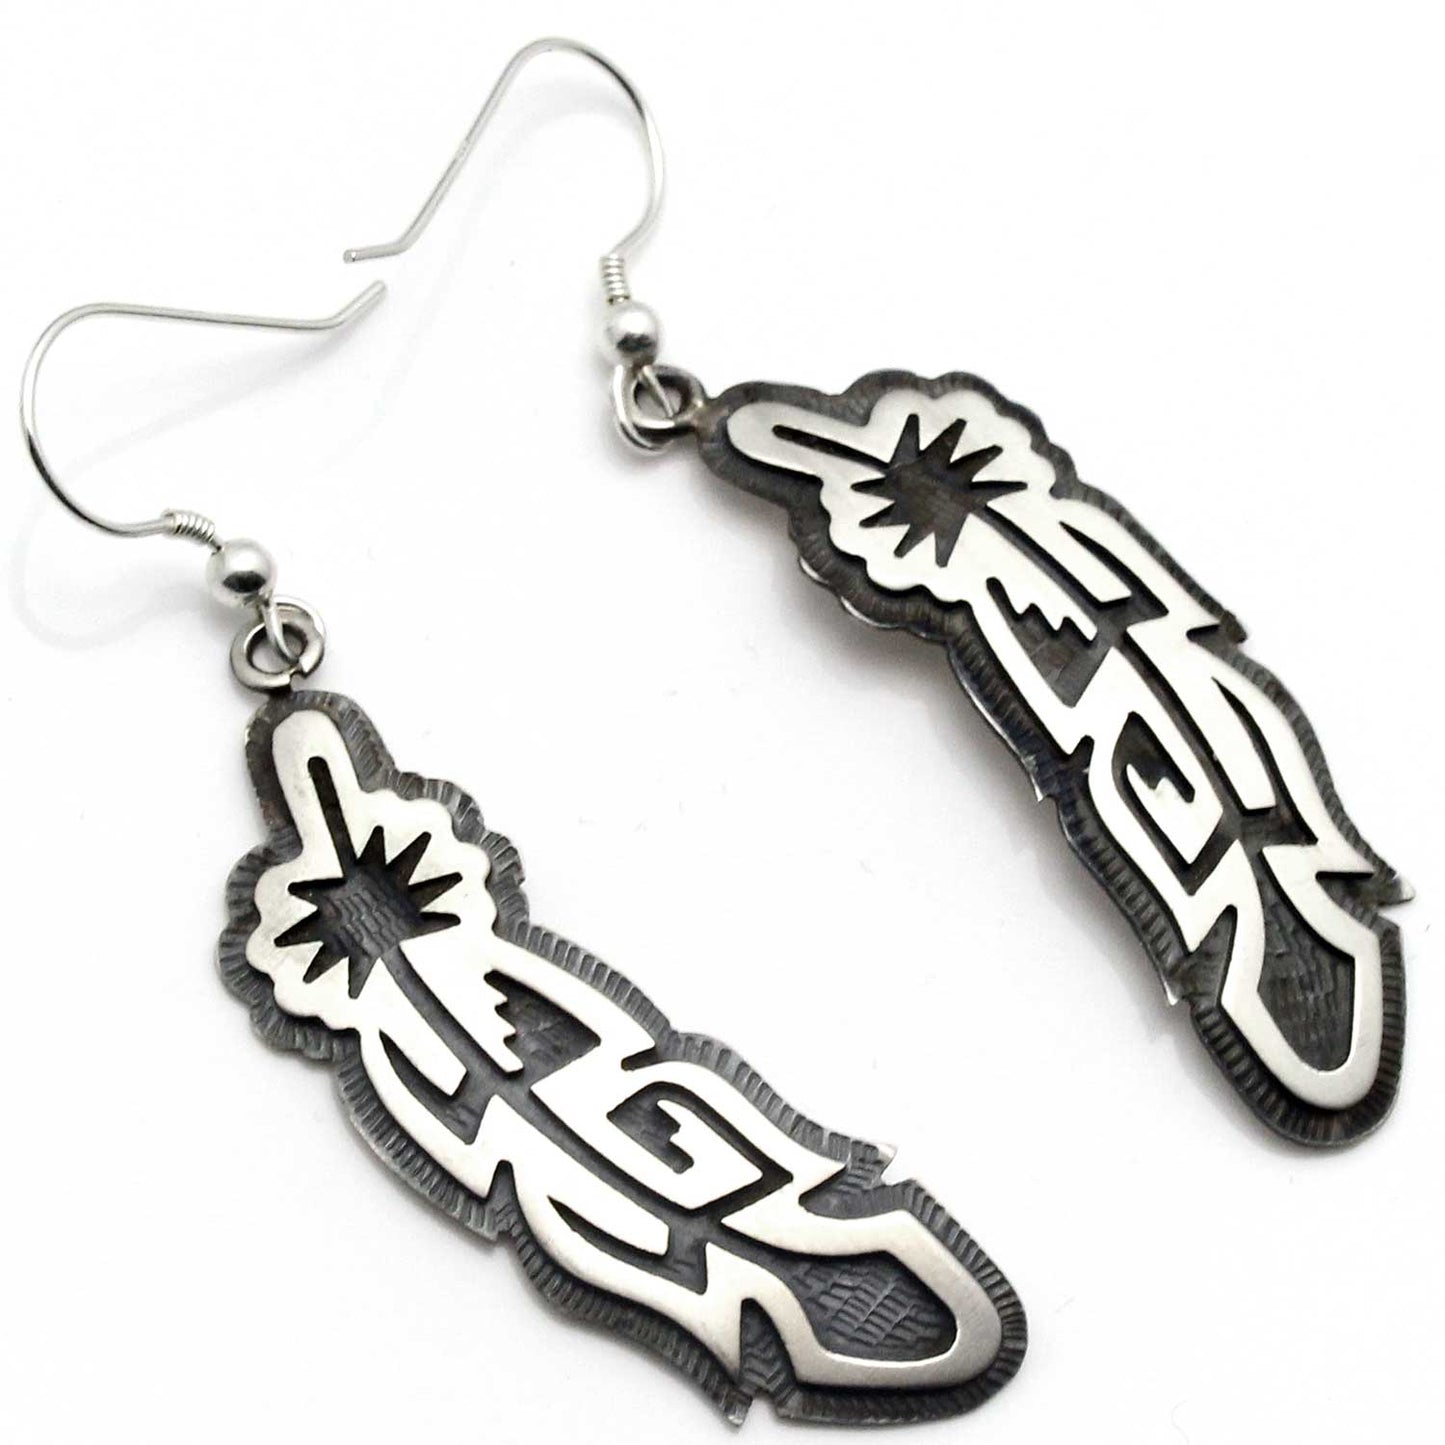 1 7/8" Hopi Sterling Silver Earrings - Feather